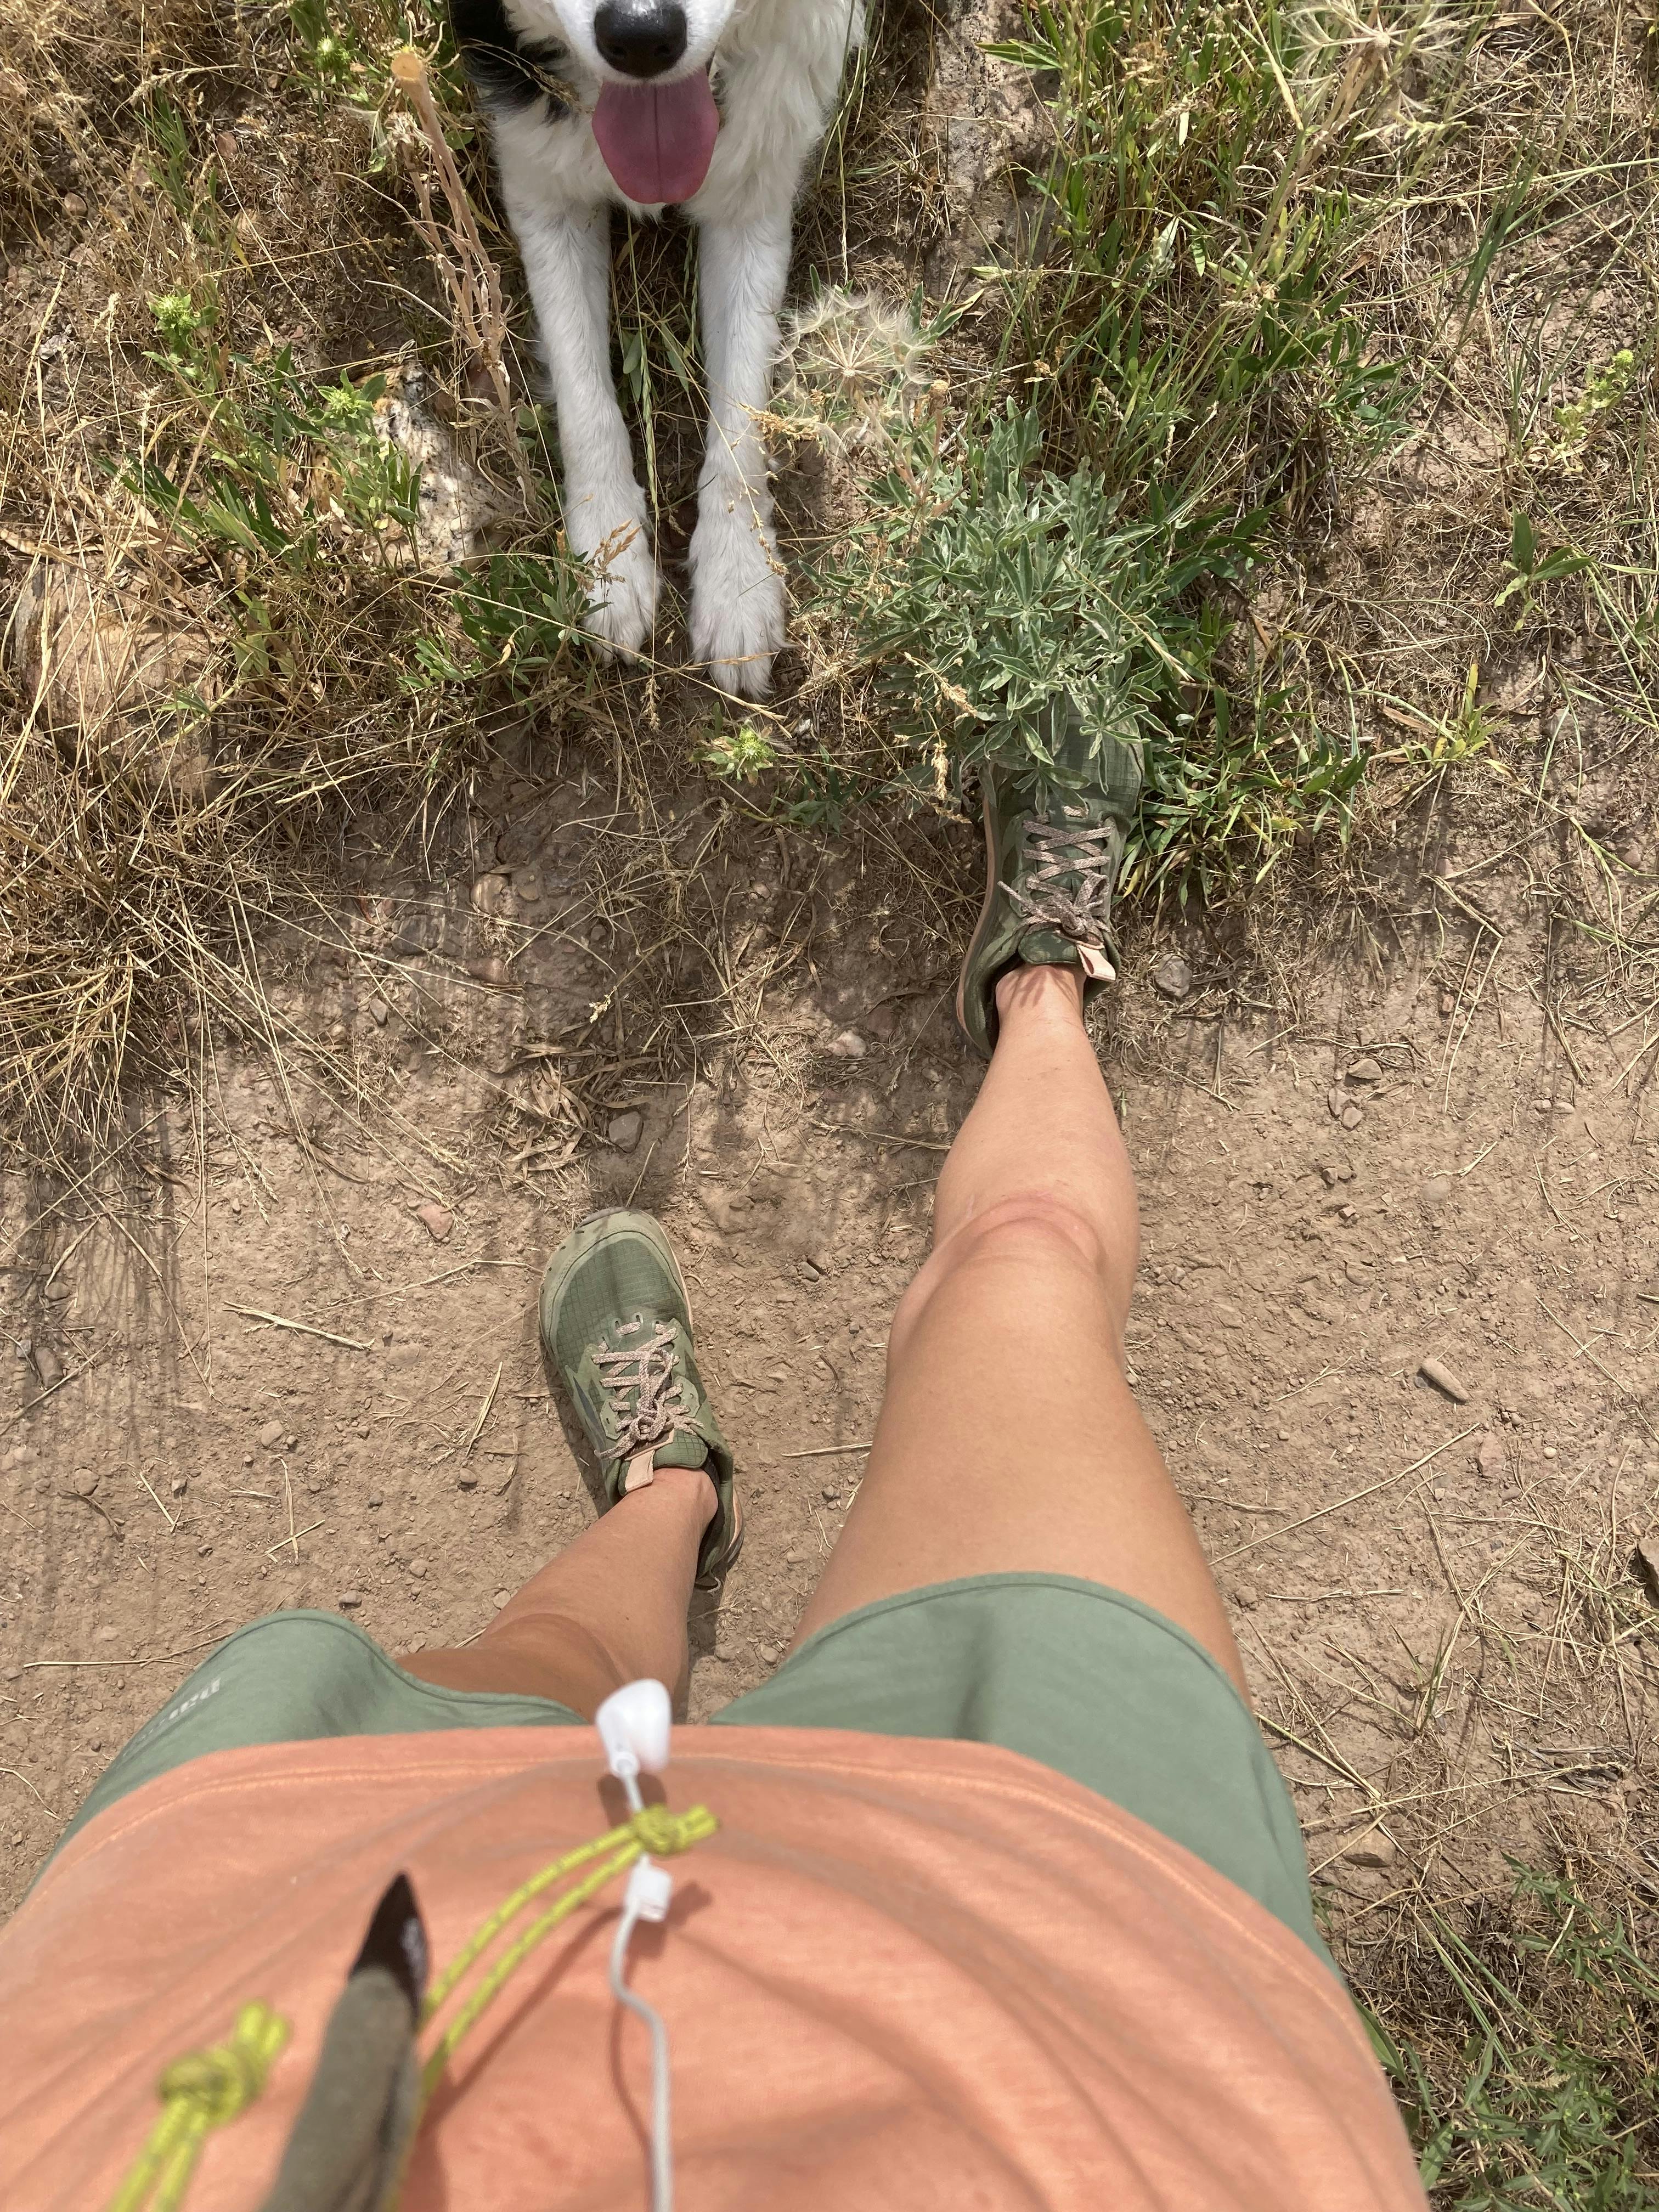 Top down view of s hiking shoe and a dog on a dirt trail. 